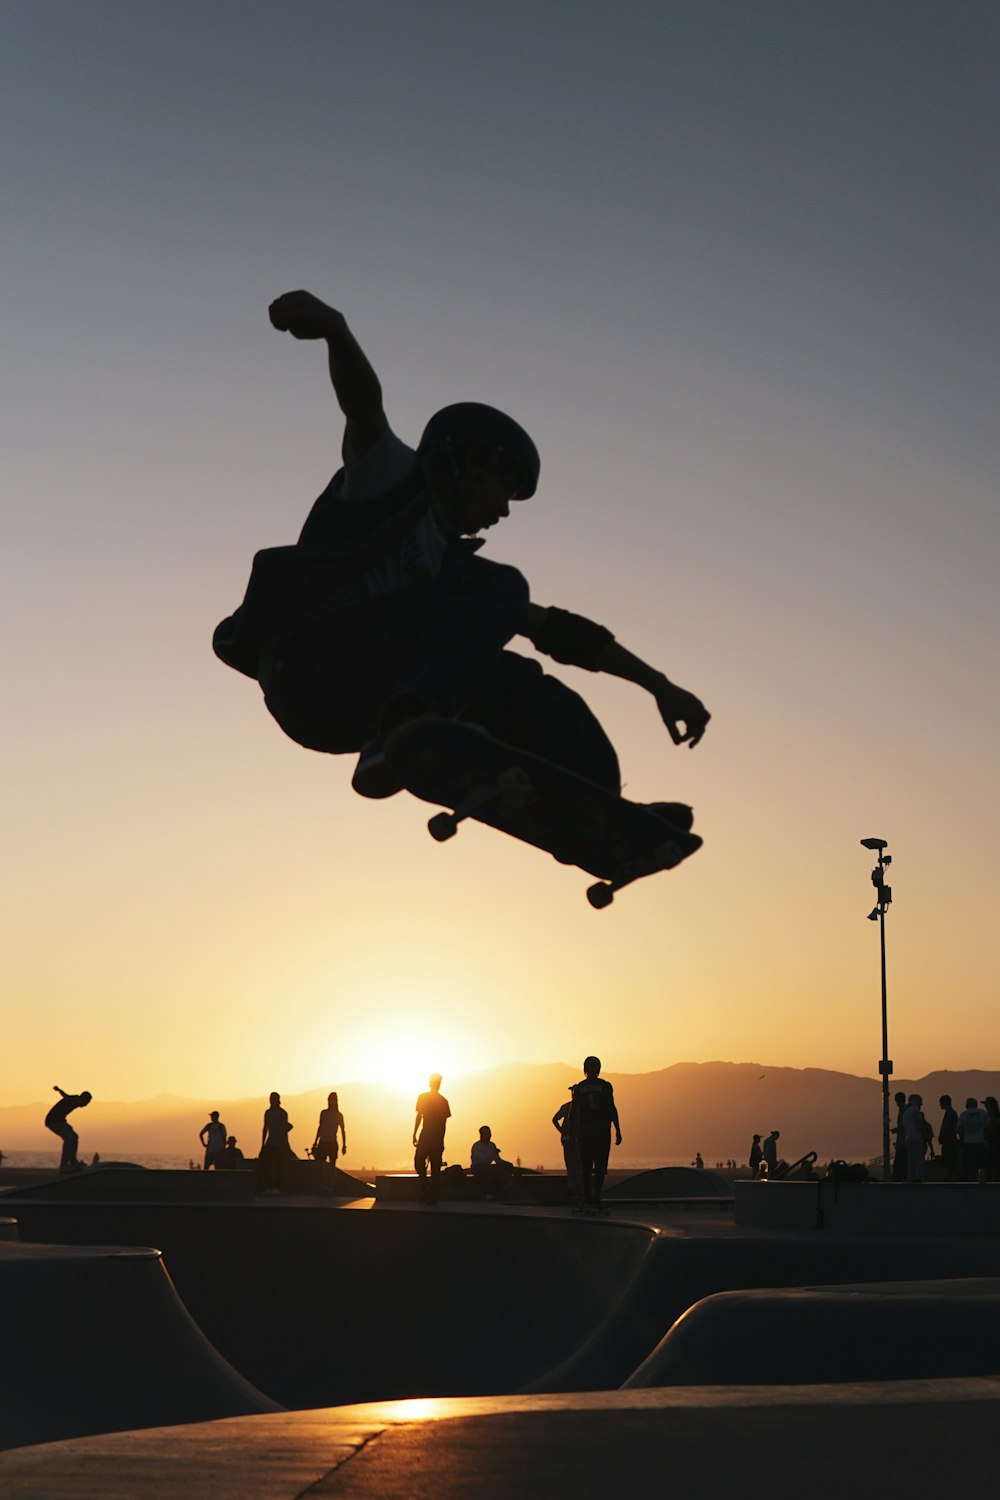 a skateboarder is doing a trick in the air